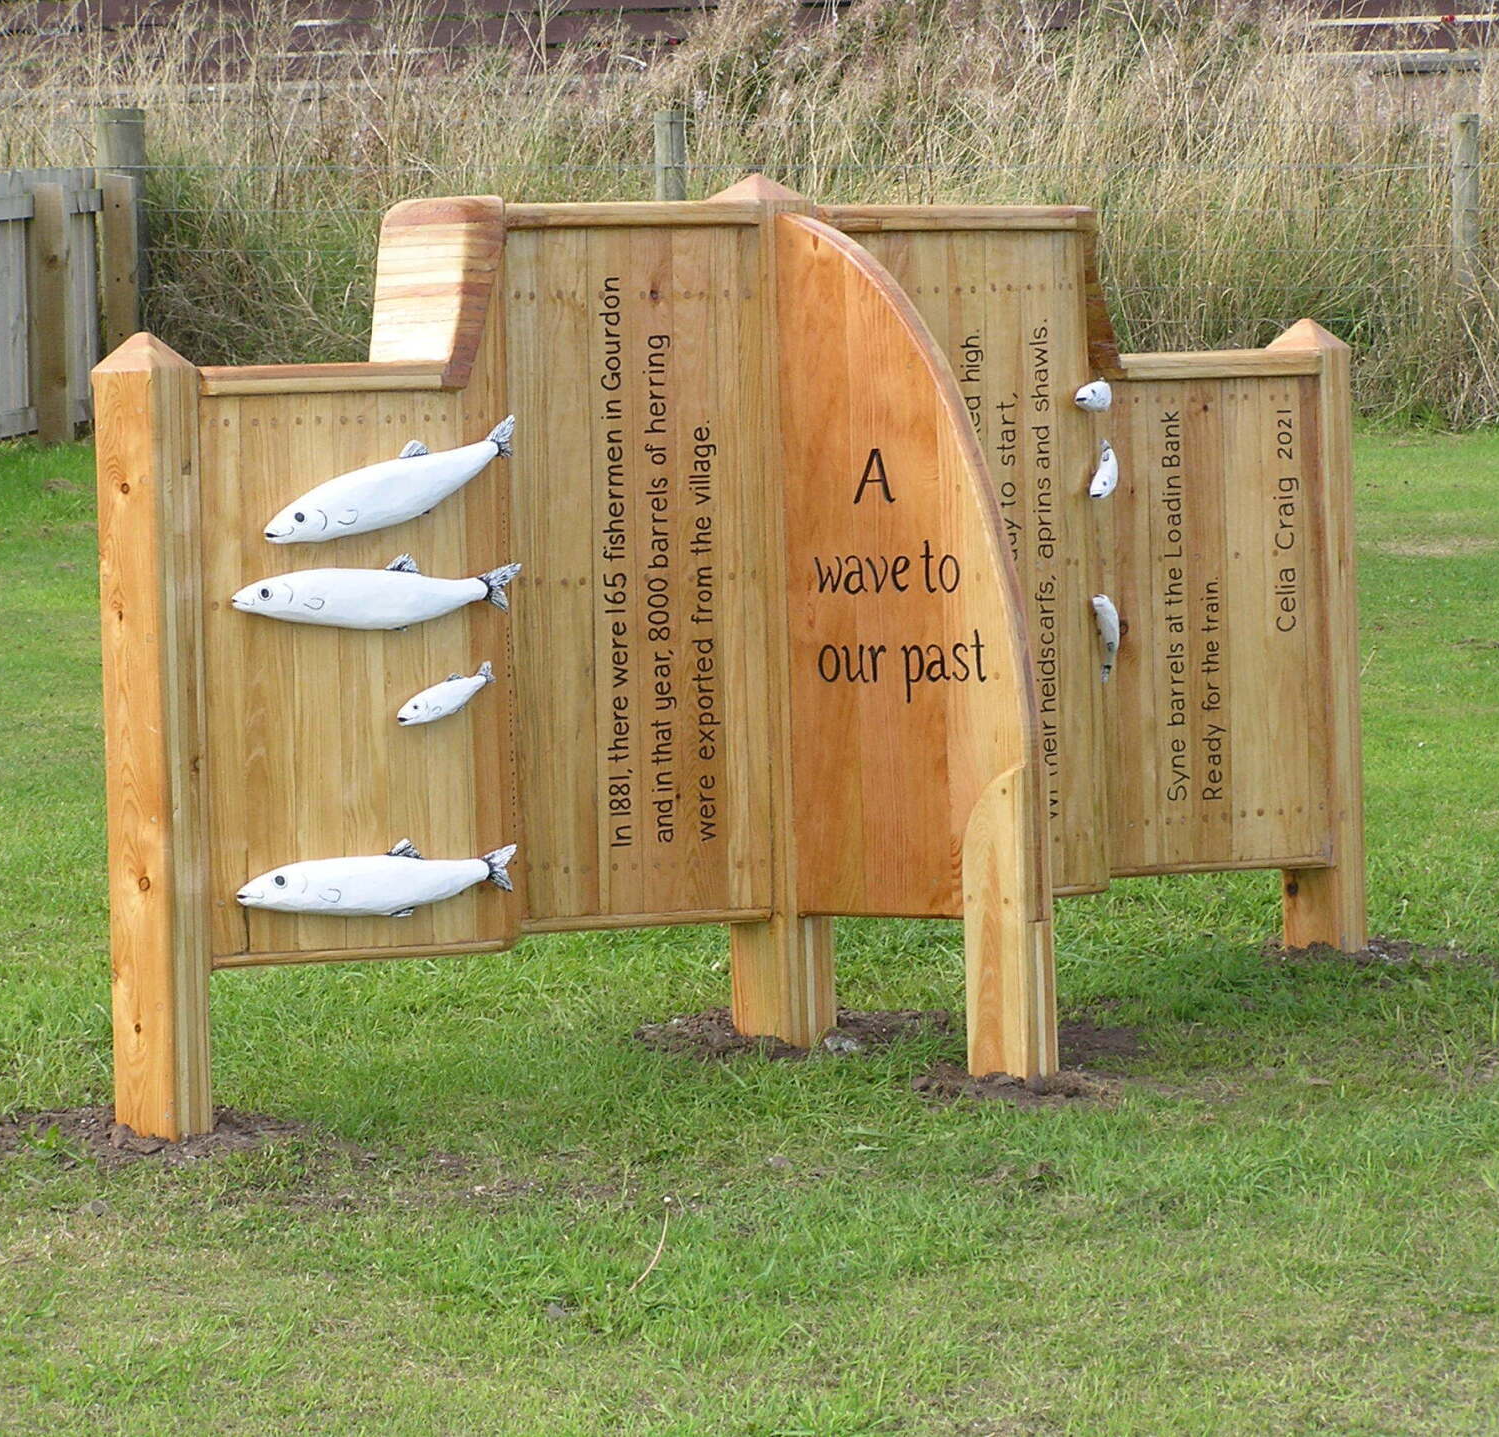 Sustainable public art sculpture, handmade from Grown in Britain wood. Made by Ingrained Culture.